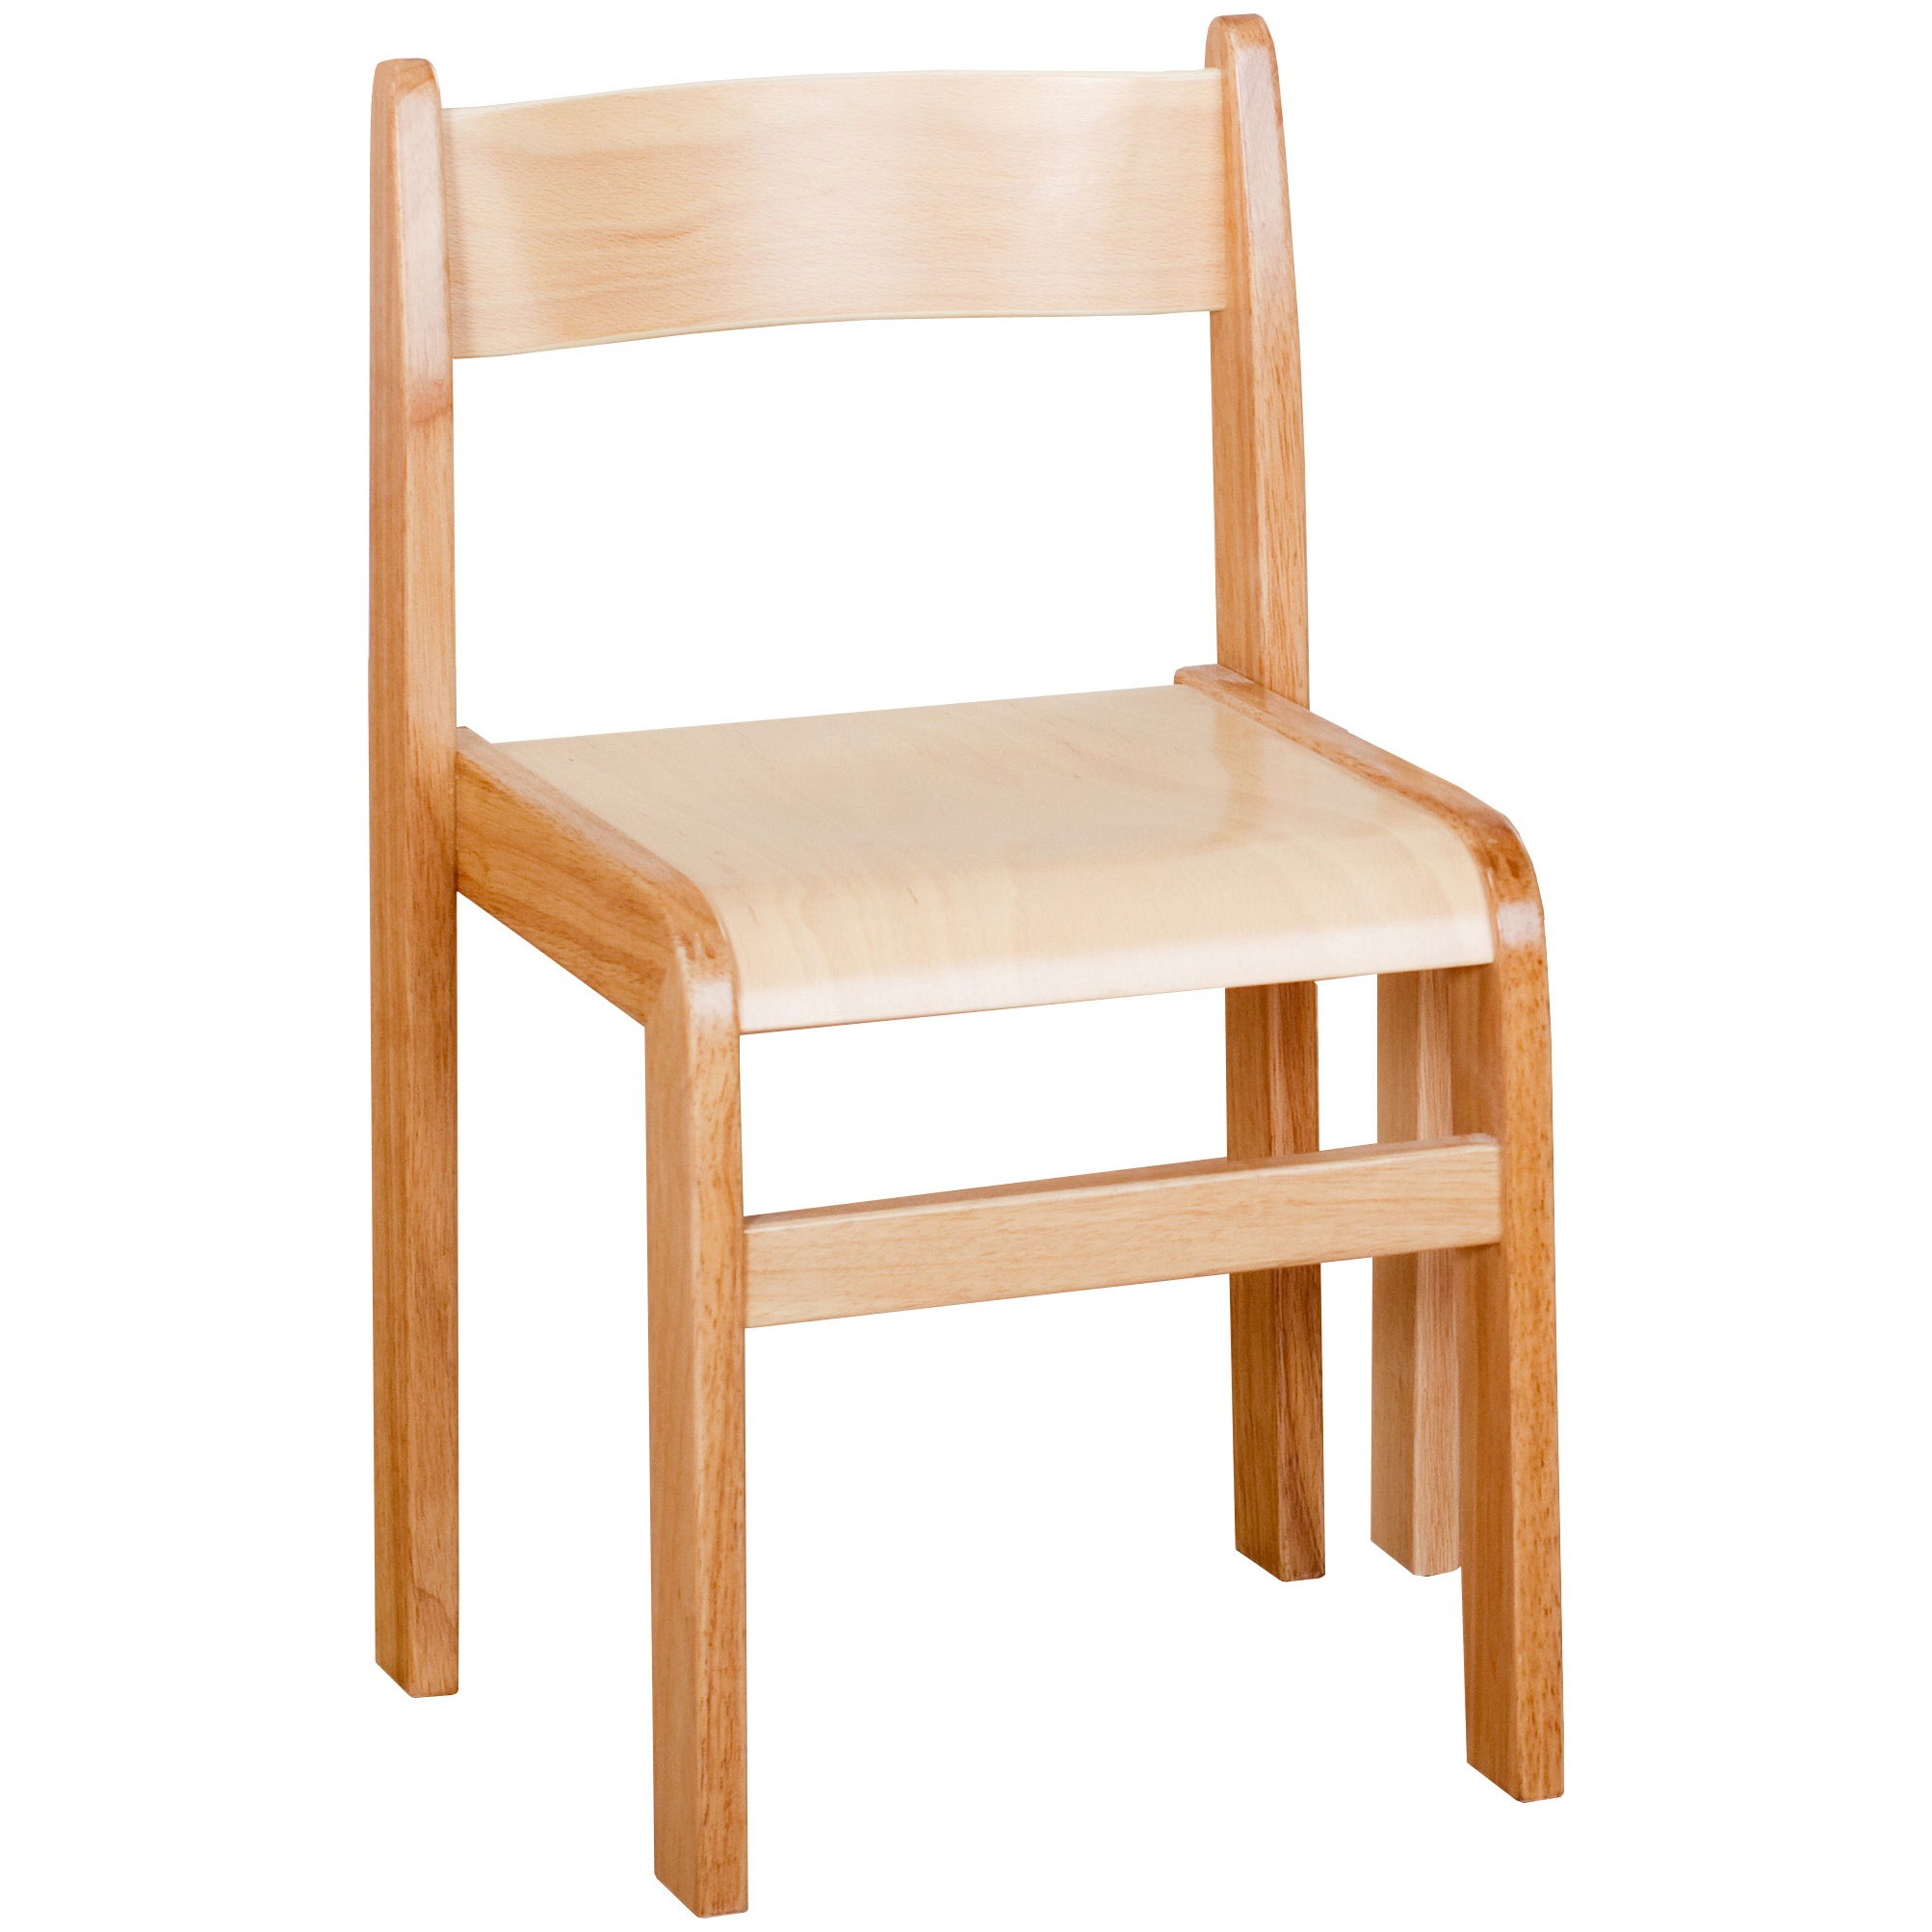 natural wooden stacking chairs pack of 2